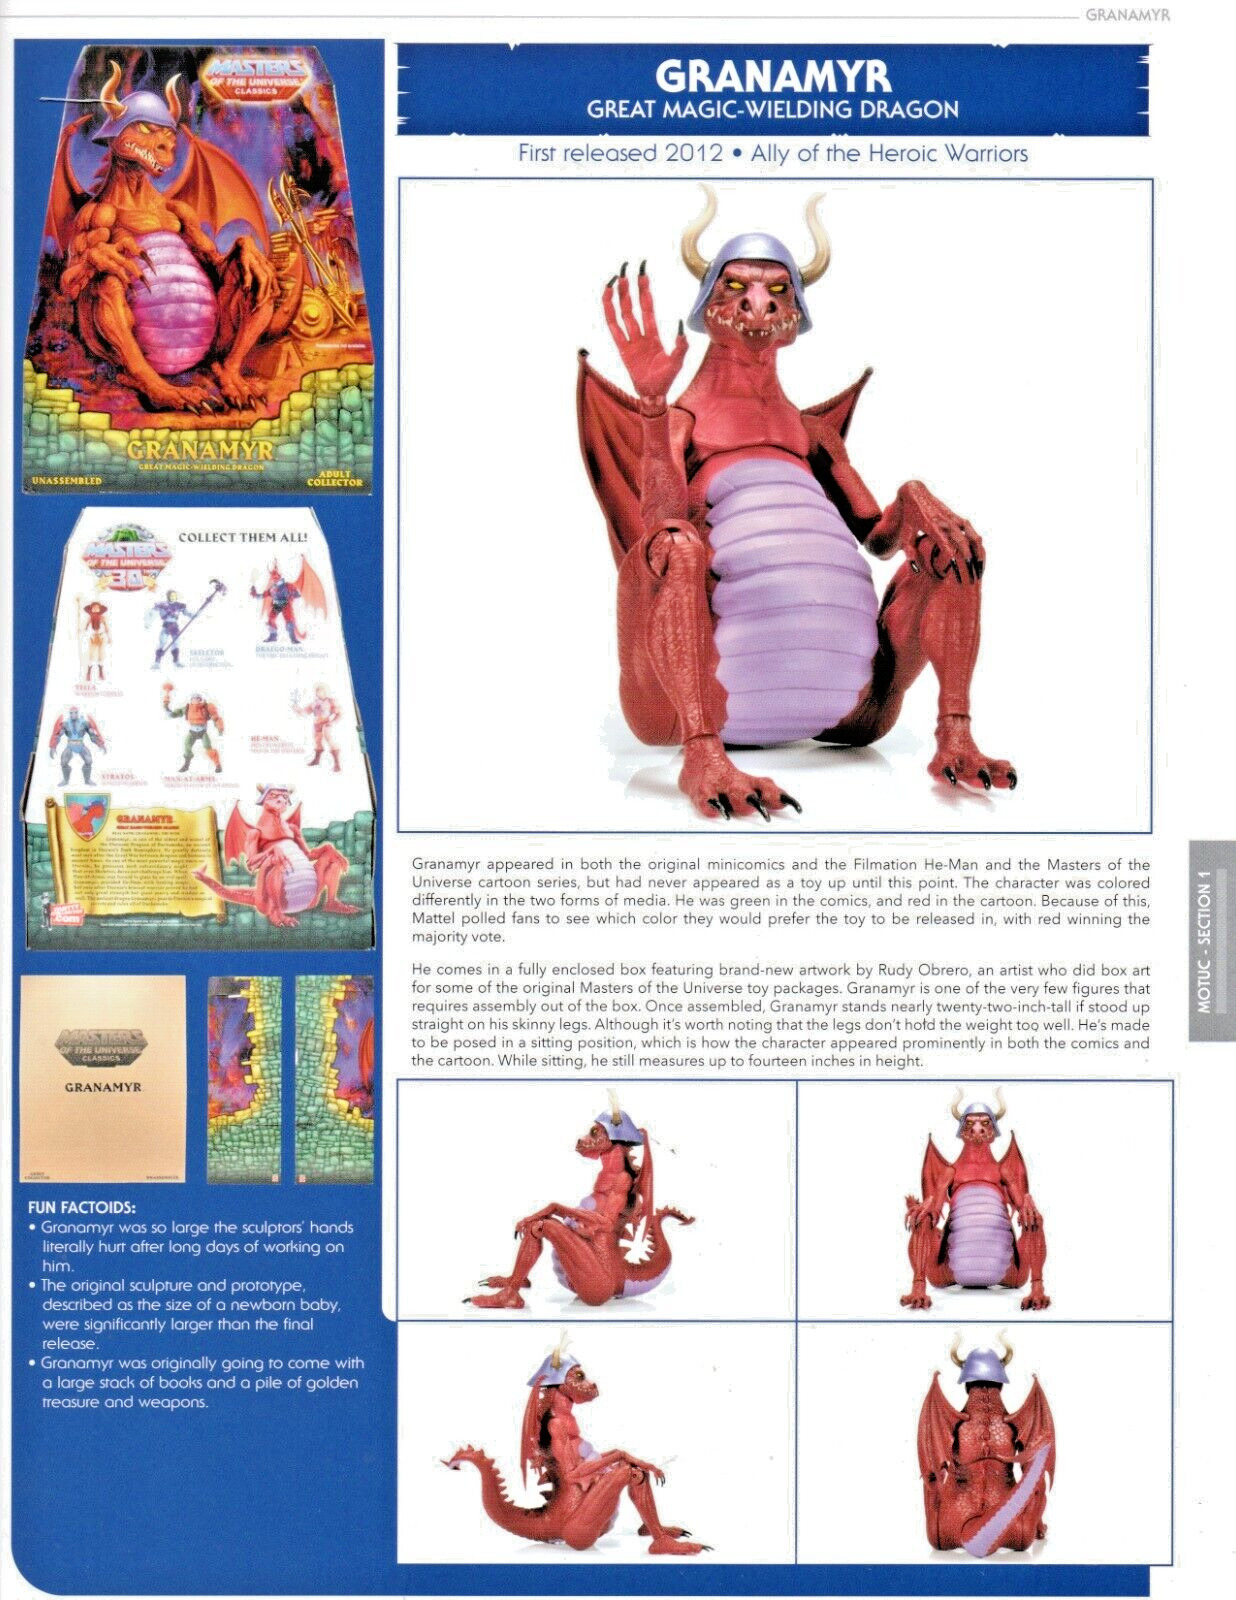 HE-MAN MOTU GRANAMYR DRAGON Character Action Figure Pin-Up PRINT AD/POSTER 9x12